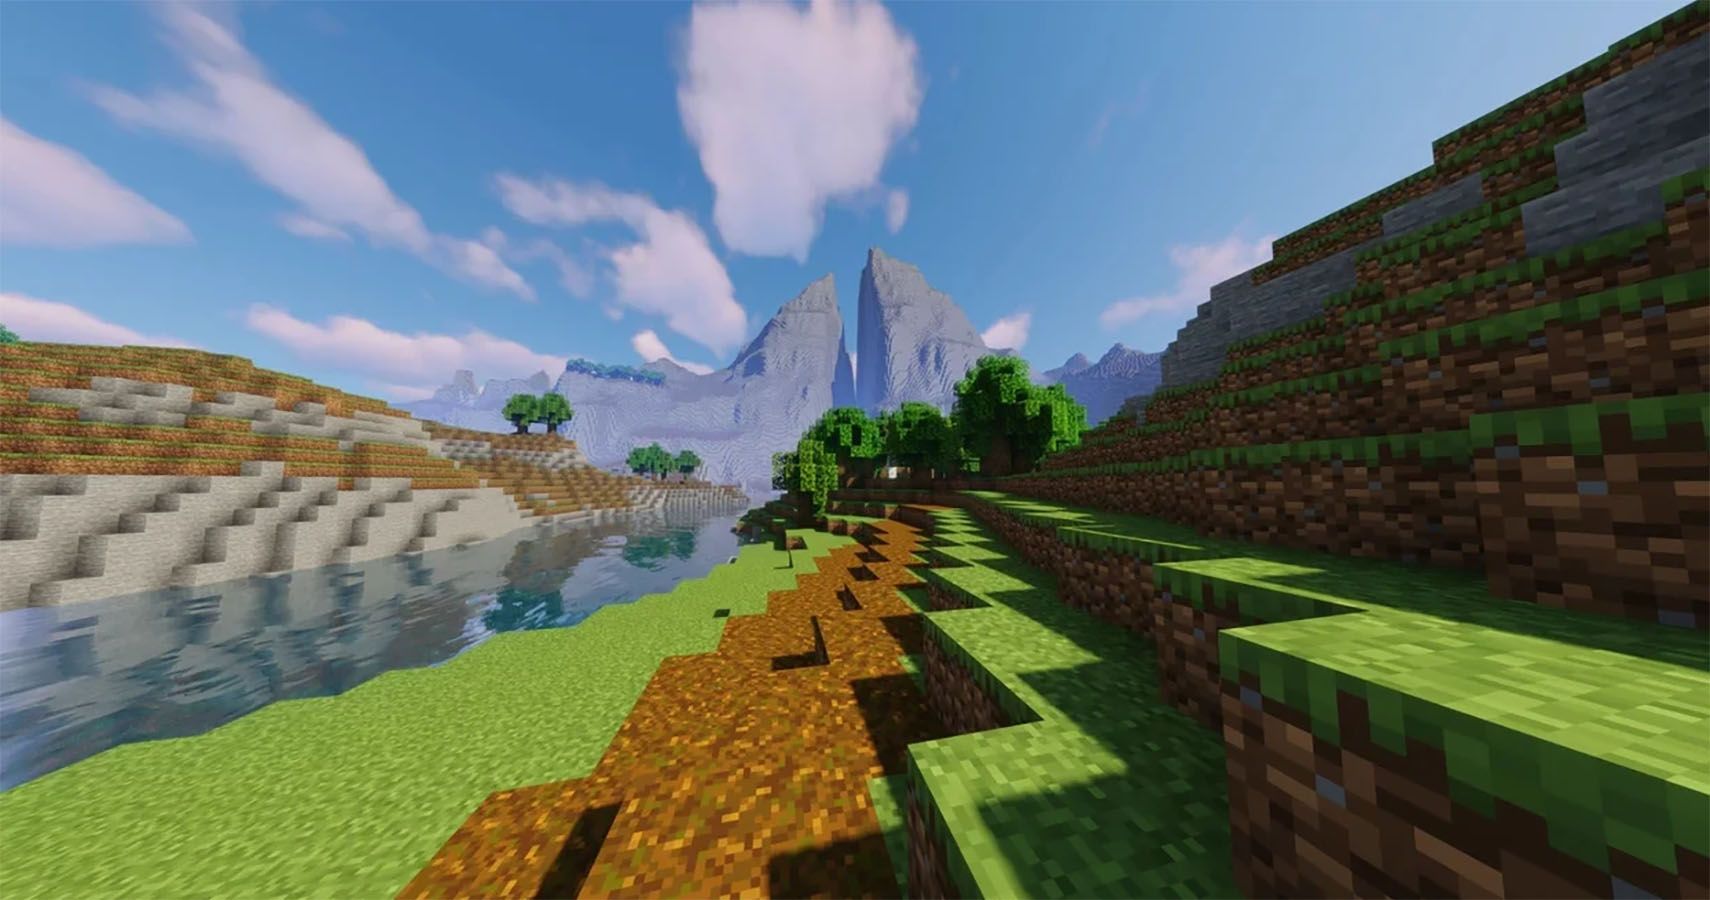 Screenshot of Hyrule from Minecraft